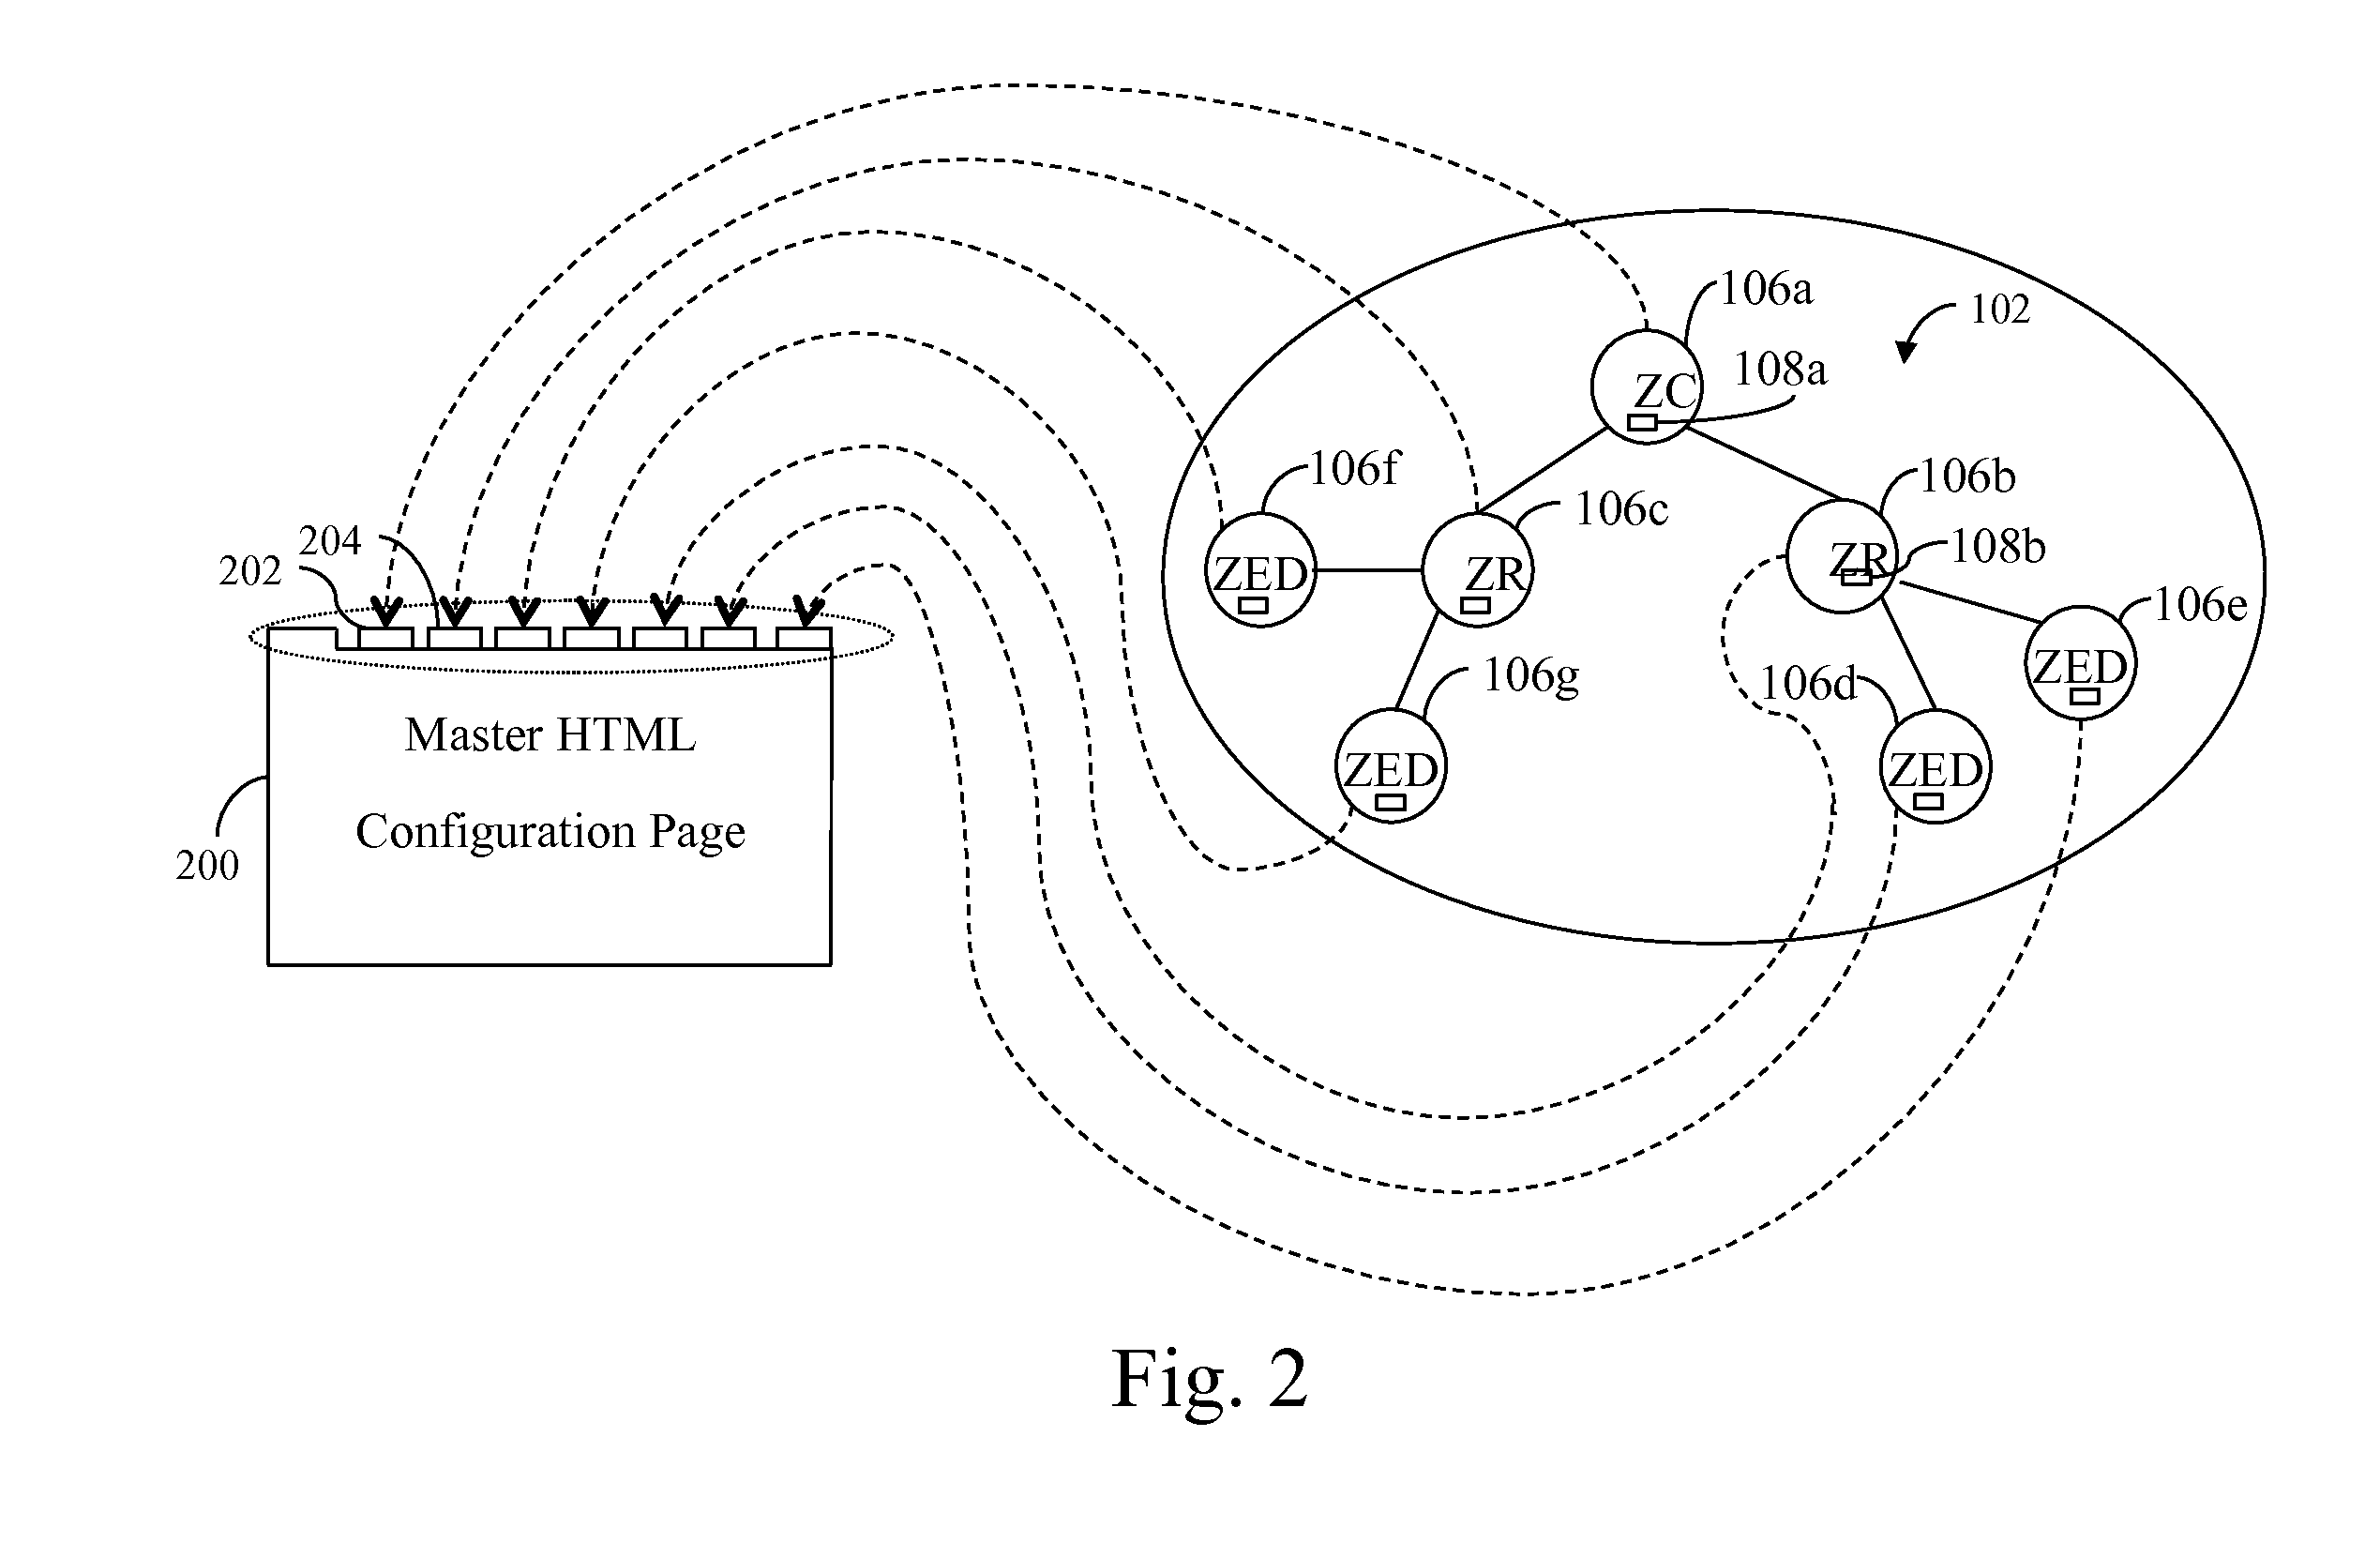 System and method for providing wi-fi access to electronic devices in a personal area network (PAN)